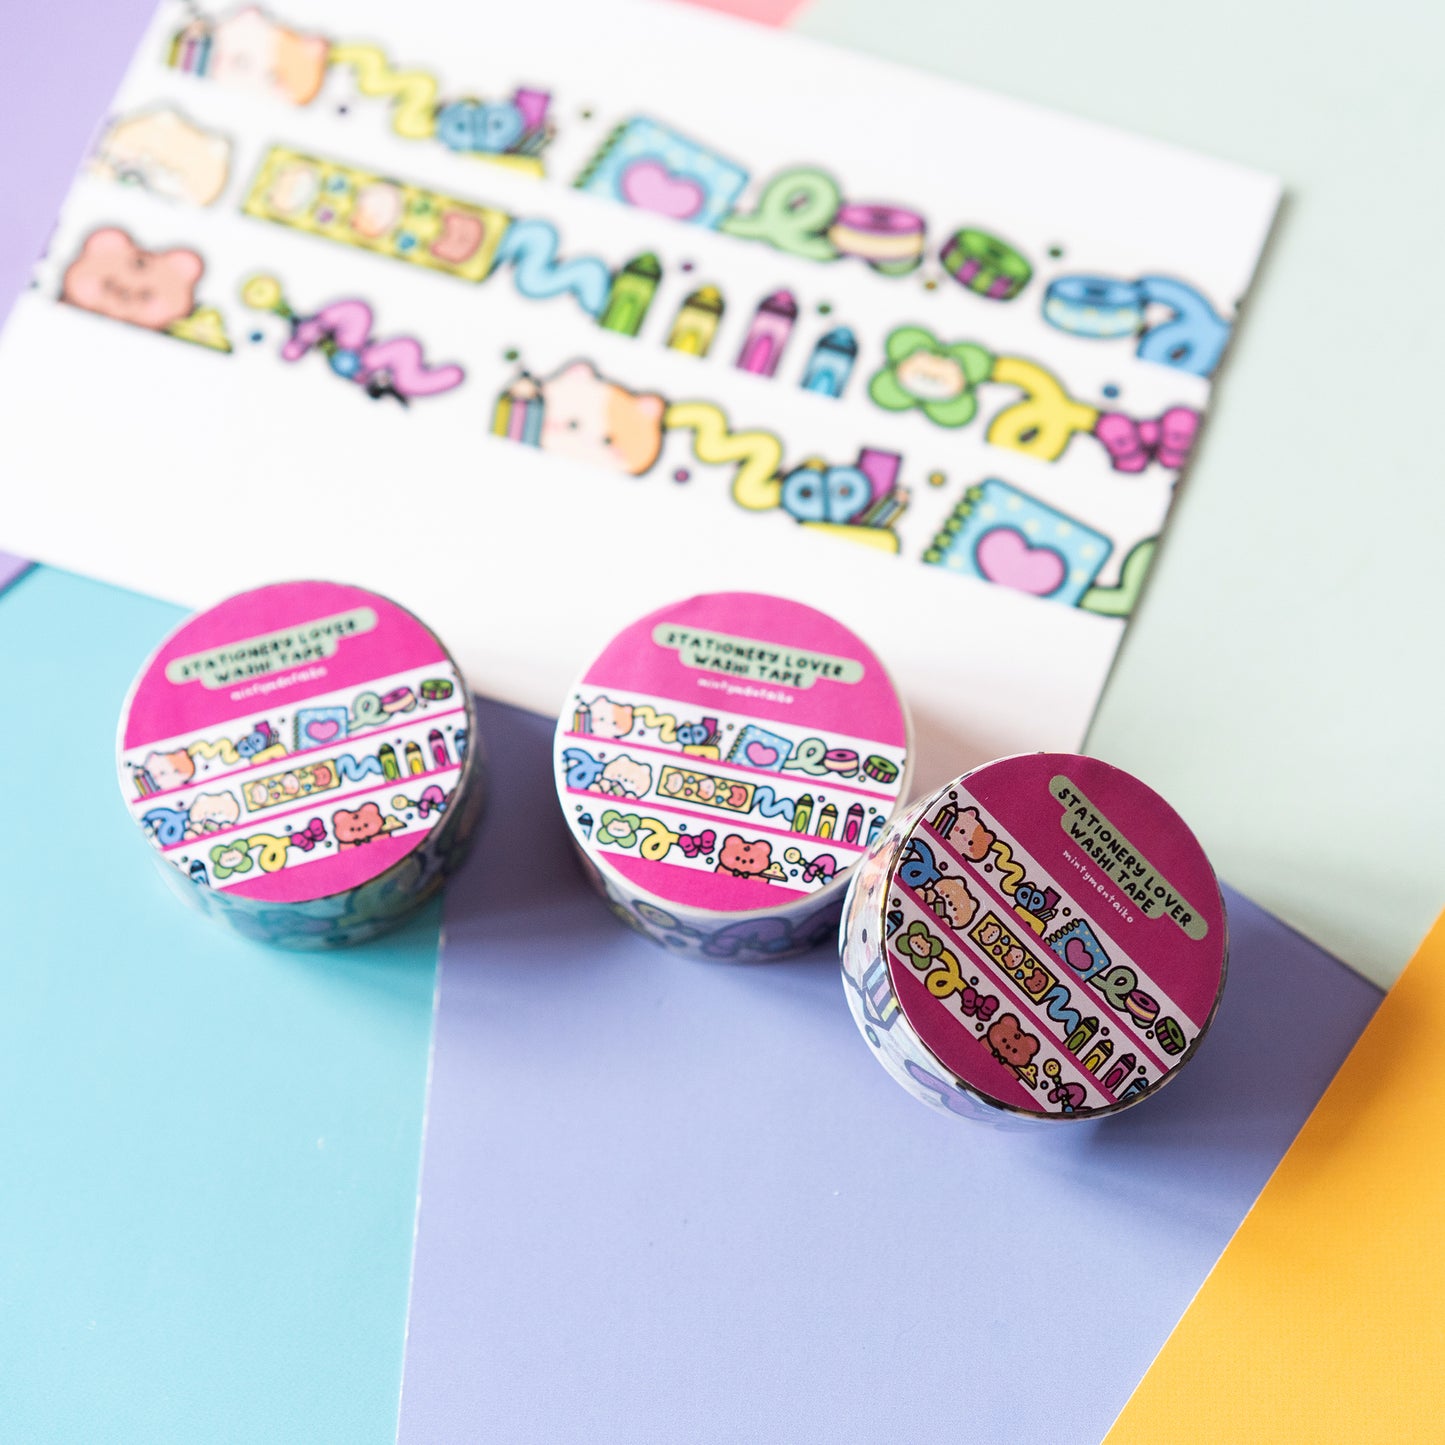 Minty Babies Lined Stationery and Journaling Washi Tape